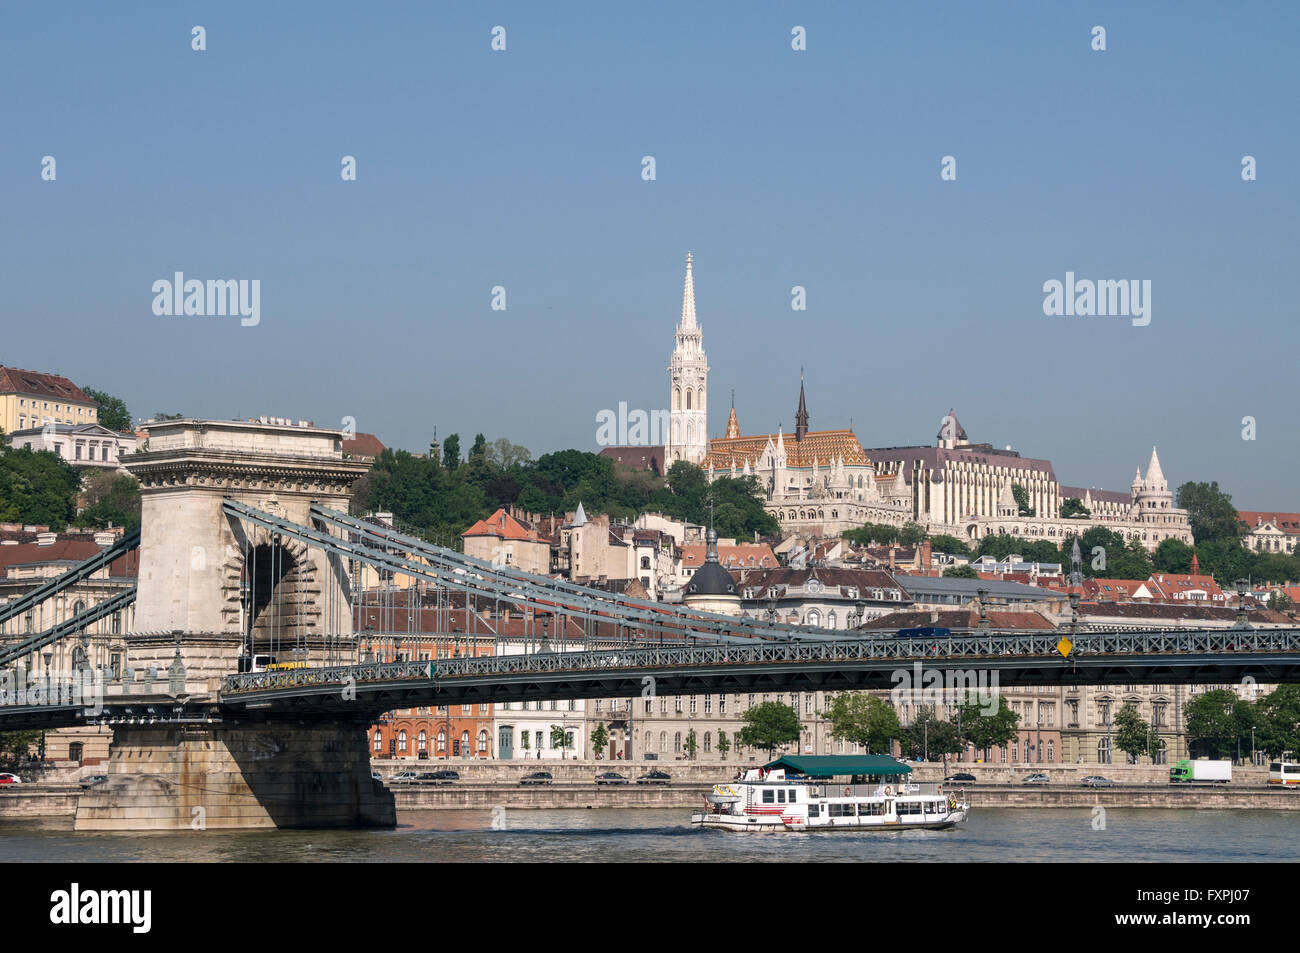 Skyline of  the River Danube, the spire of  Matthias Church and the Széchenyi Chain Bridge in Budapest in Hungary, Stock Photo